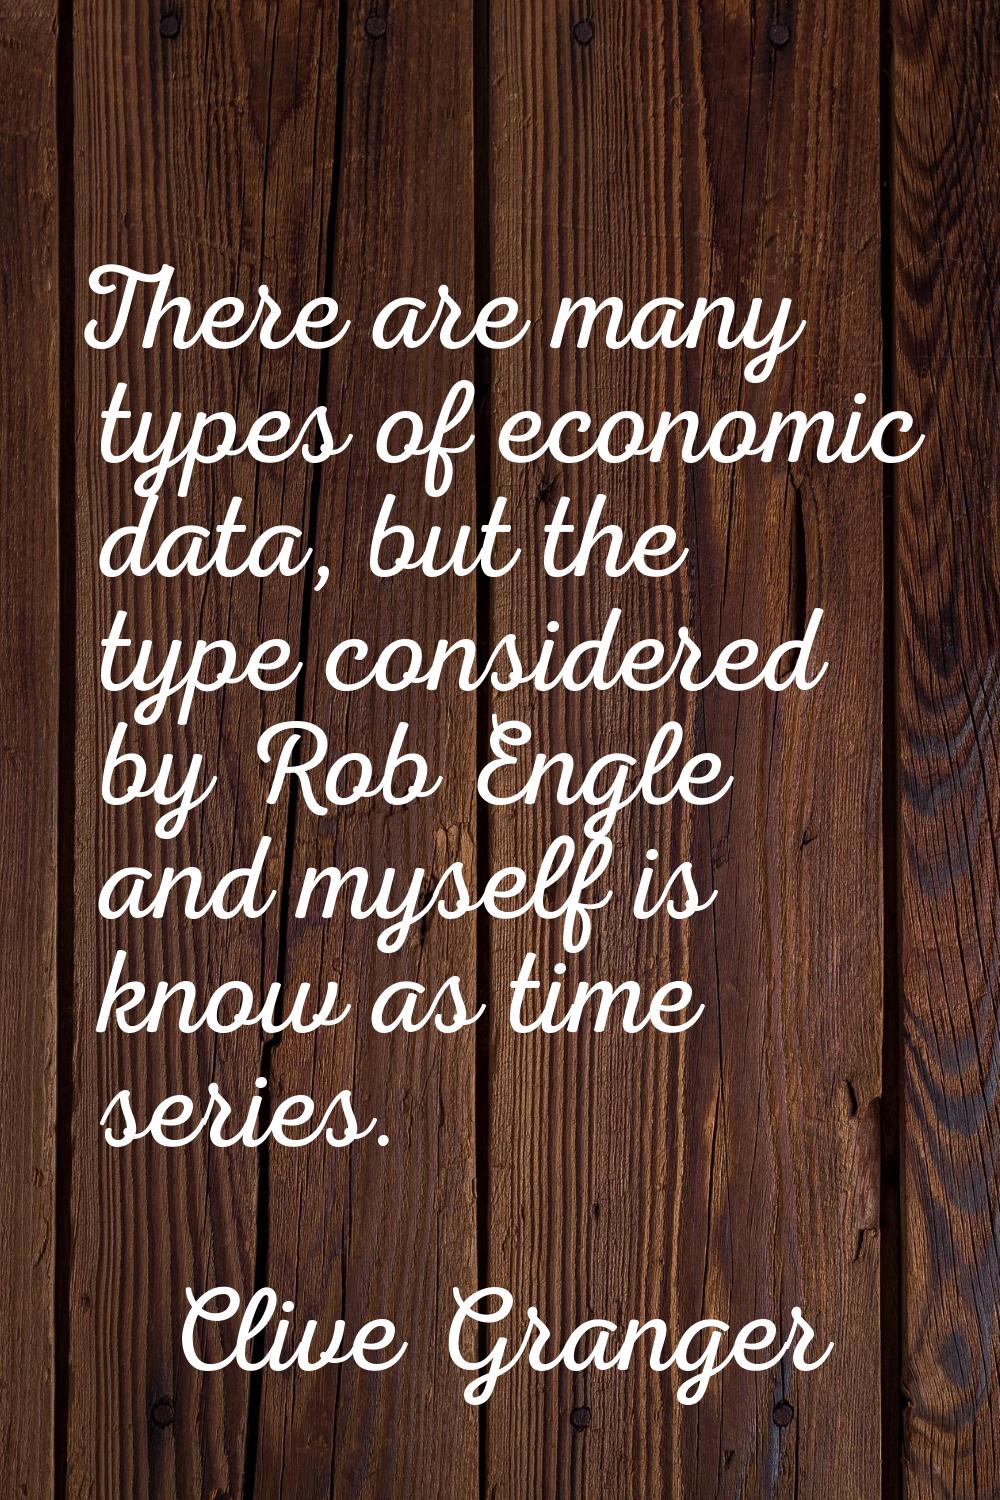 There are many types of economic data, but the type considered by Rob Engle and myself is know as t